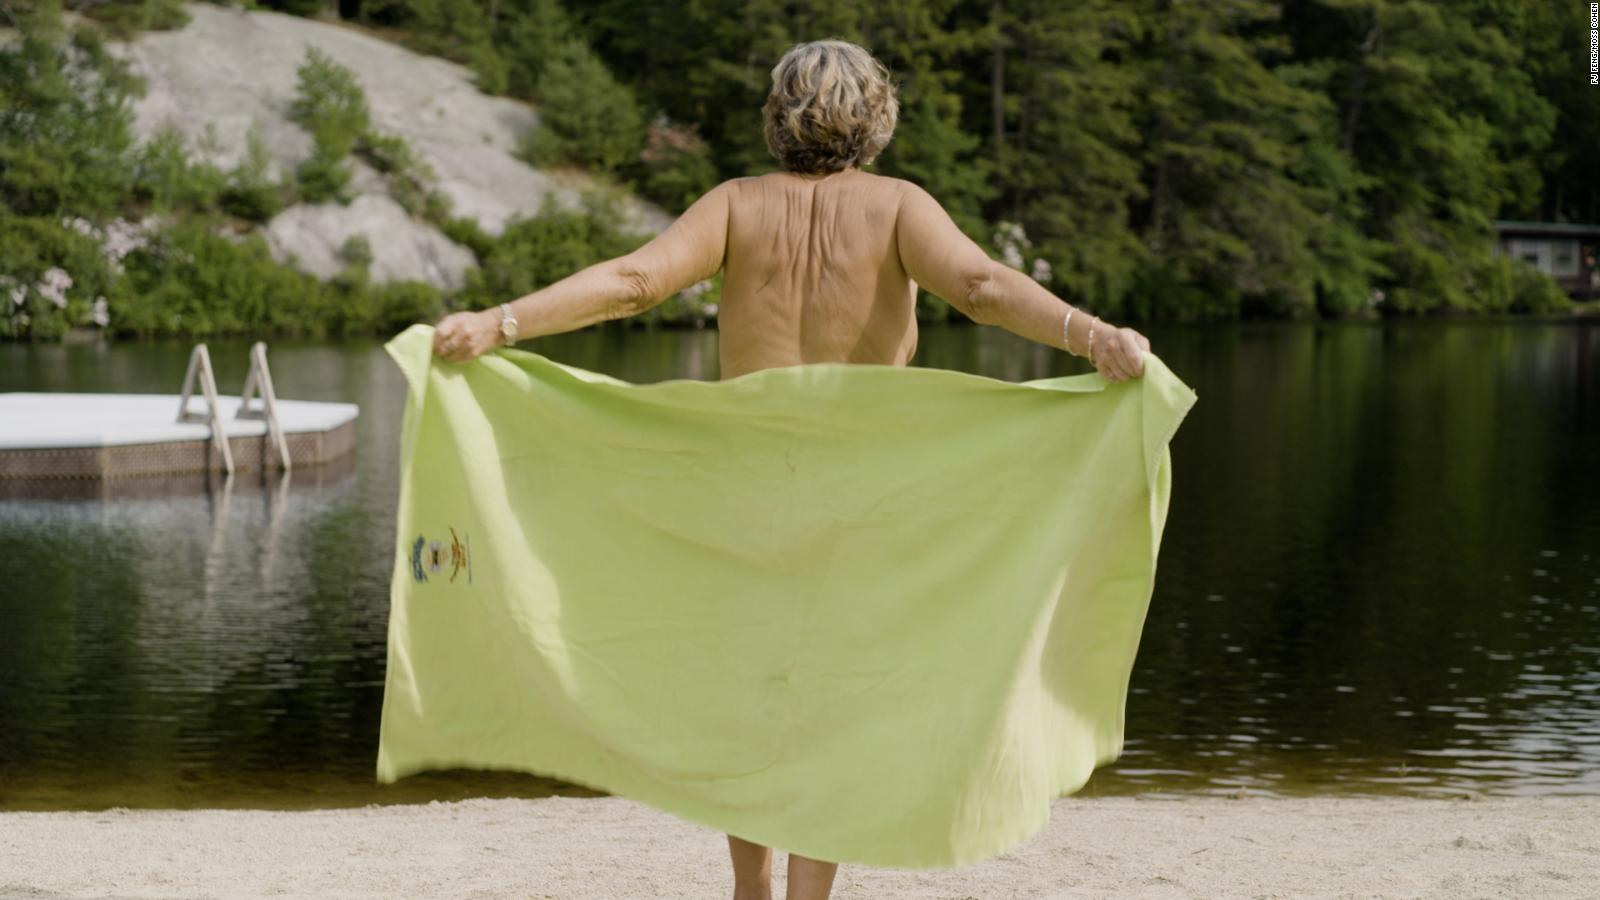 Nudist explains what you should definitely not do at a nude beach picture